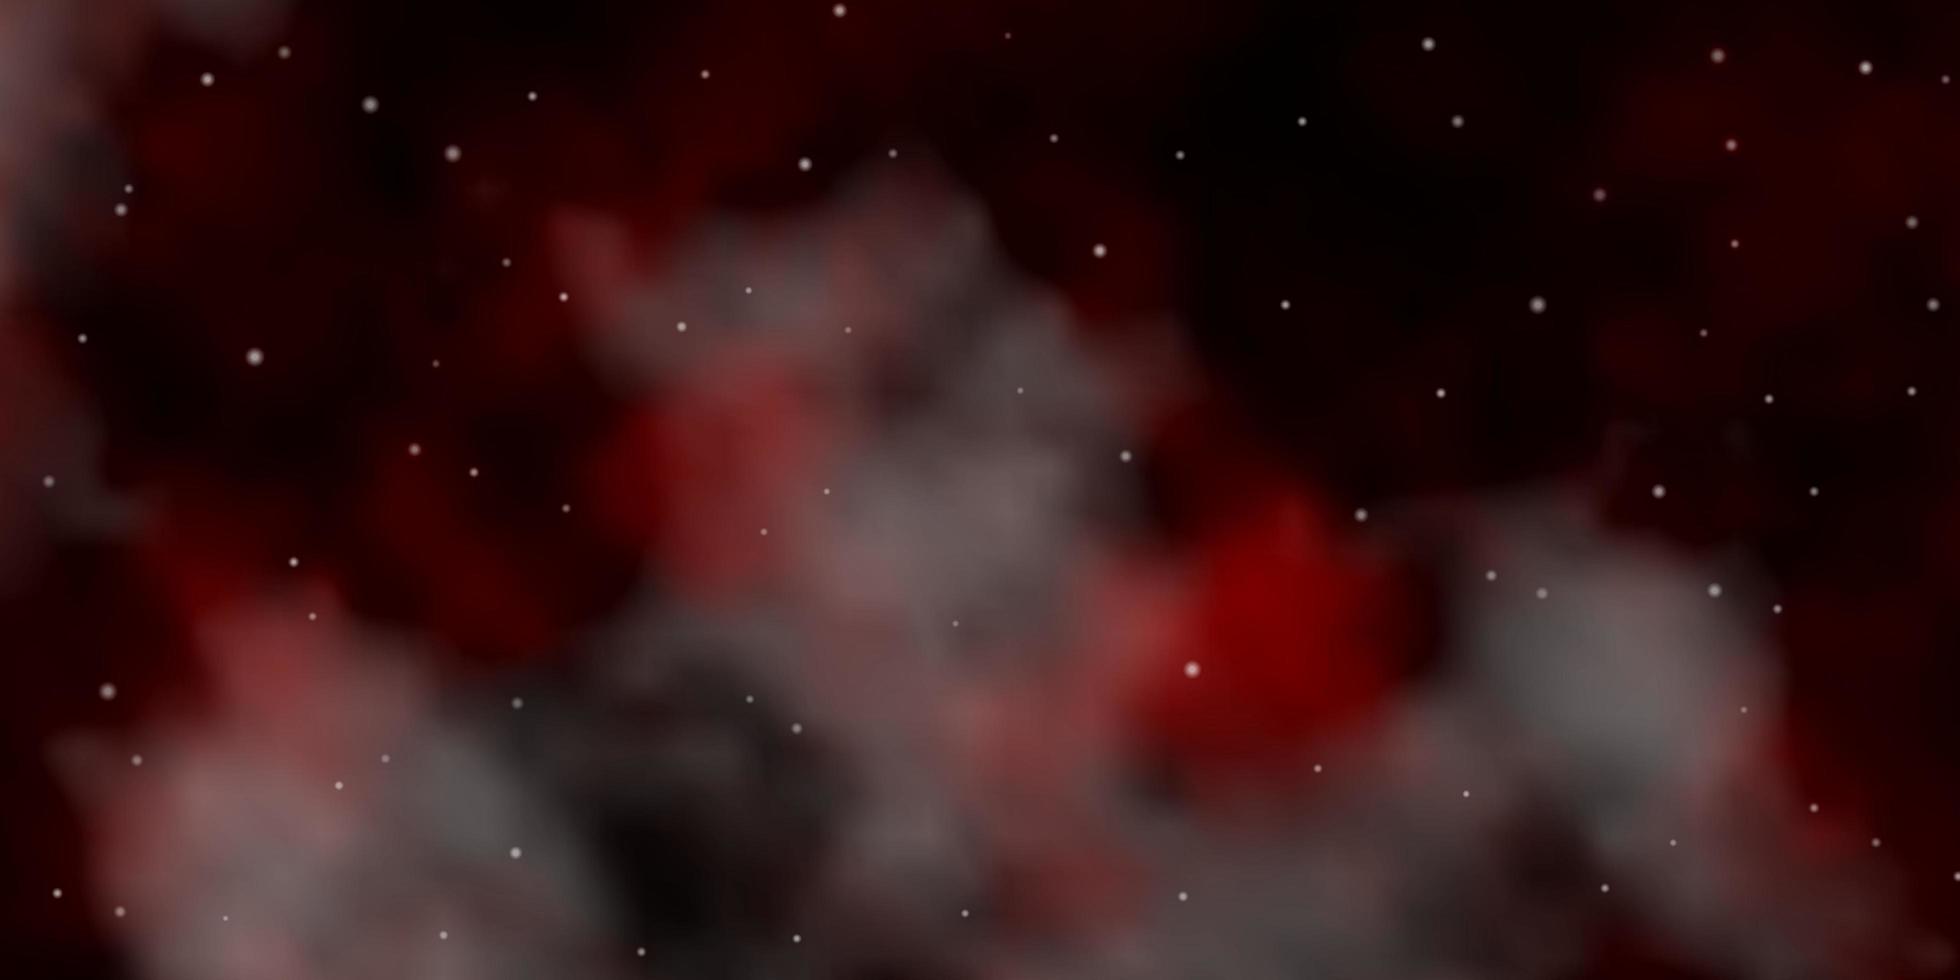 Dark Red vector background with colorful stars.